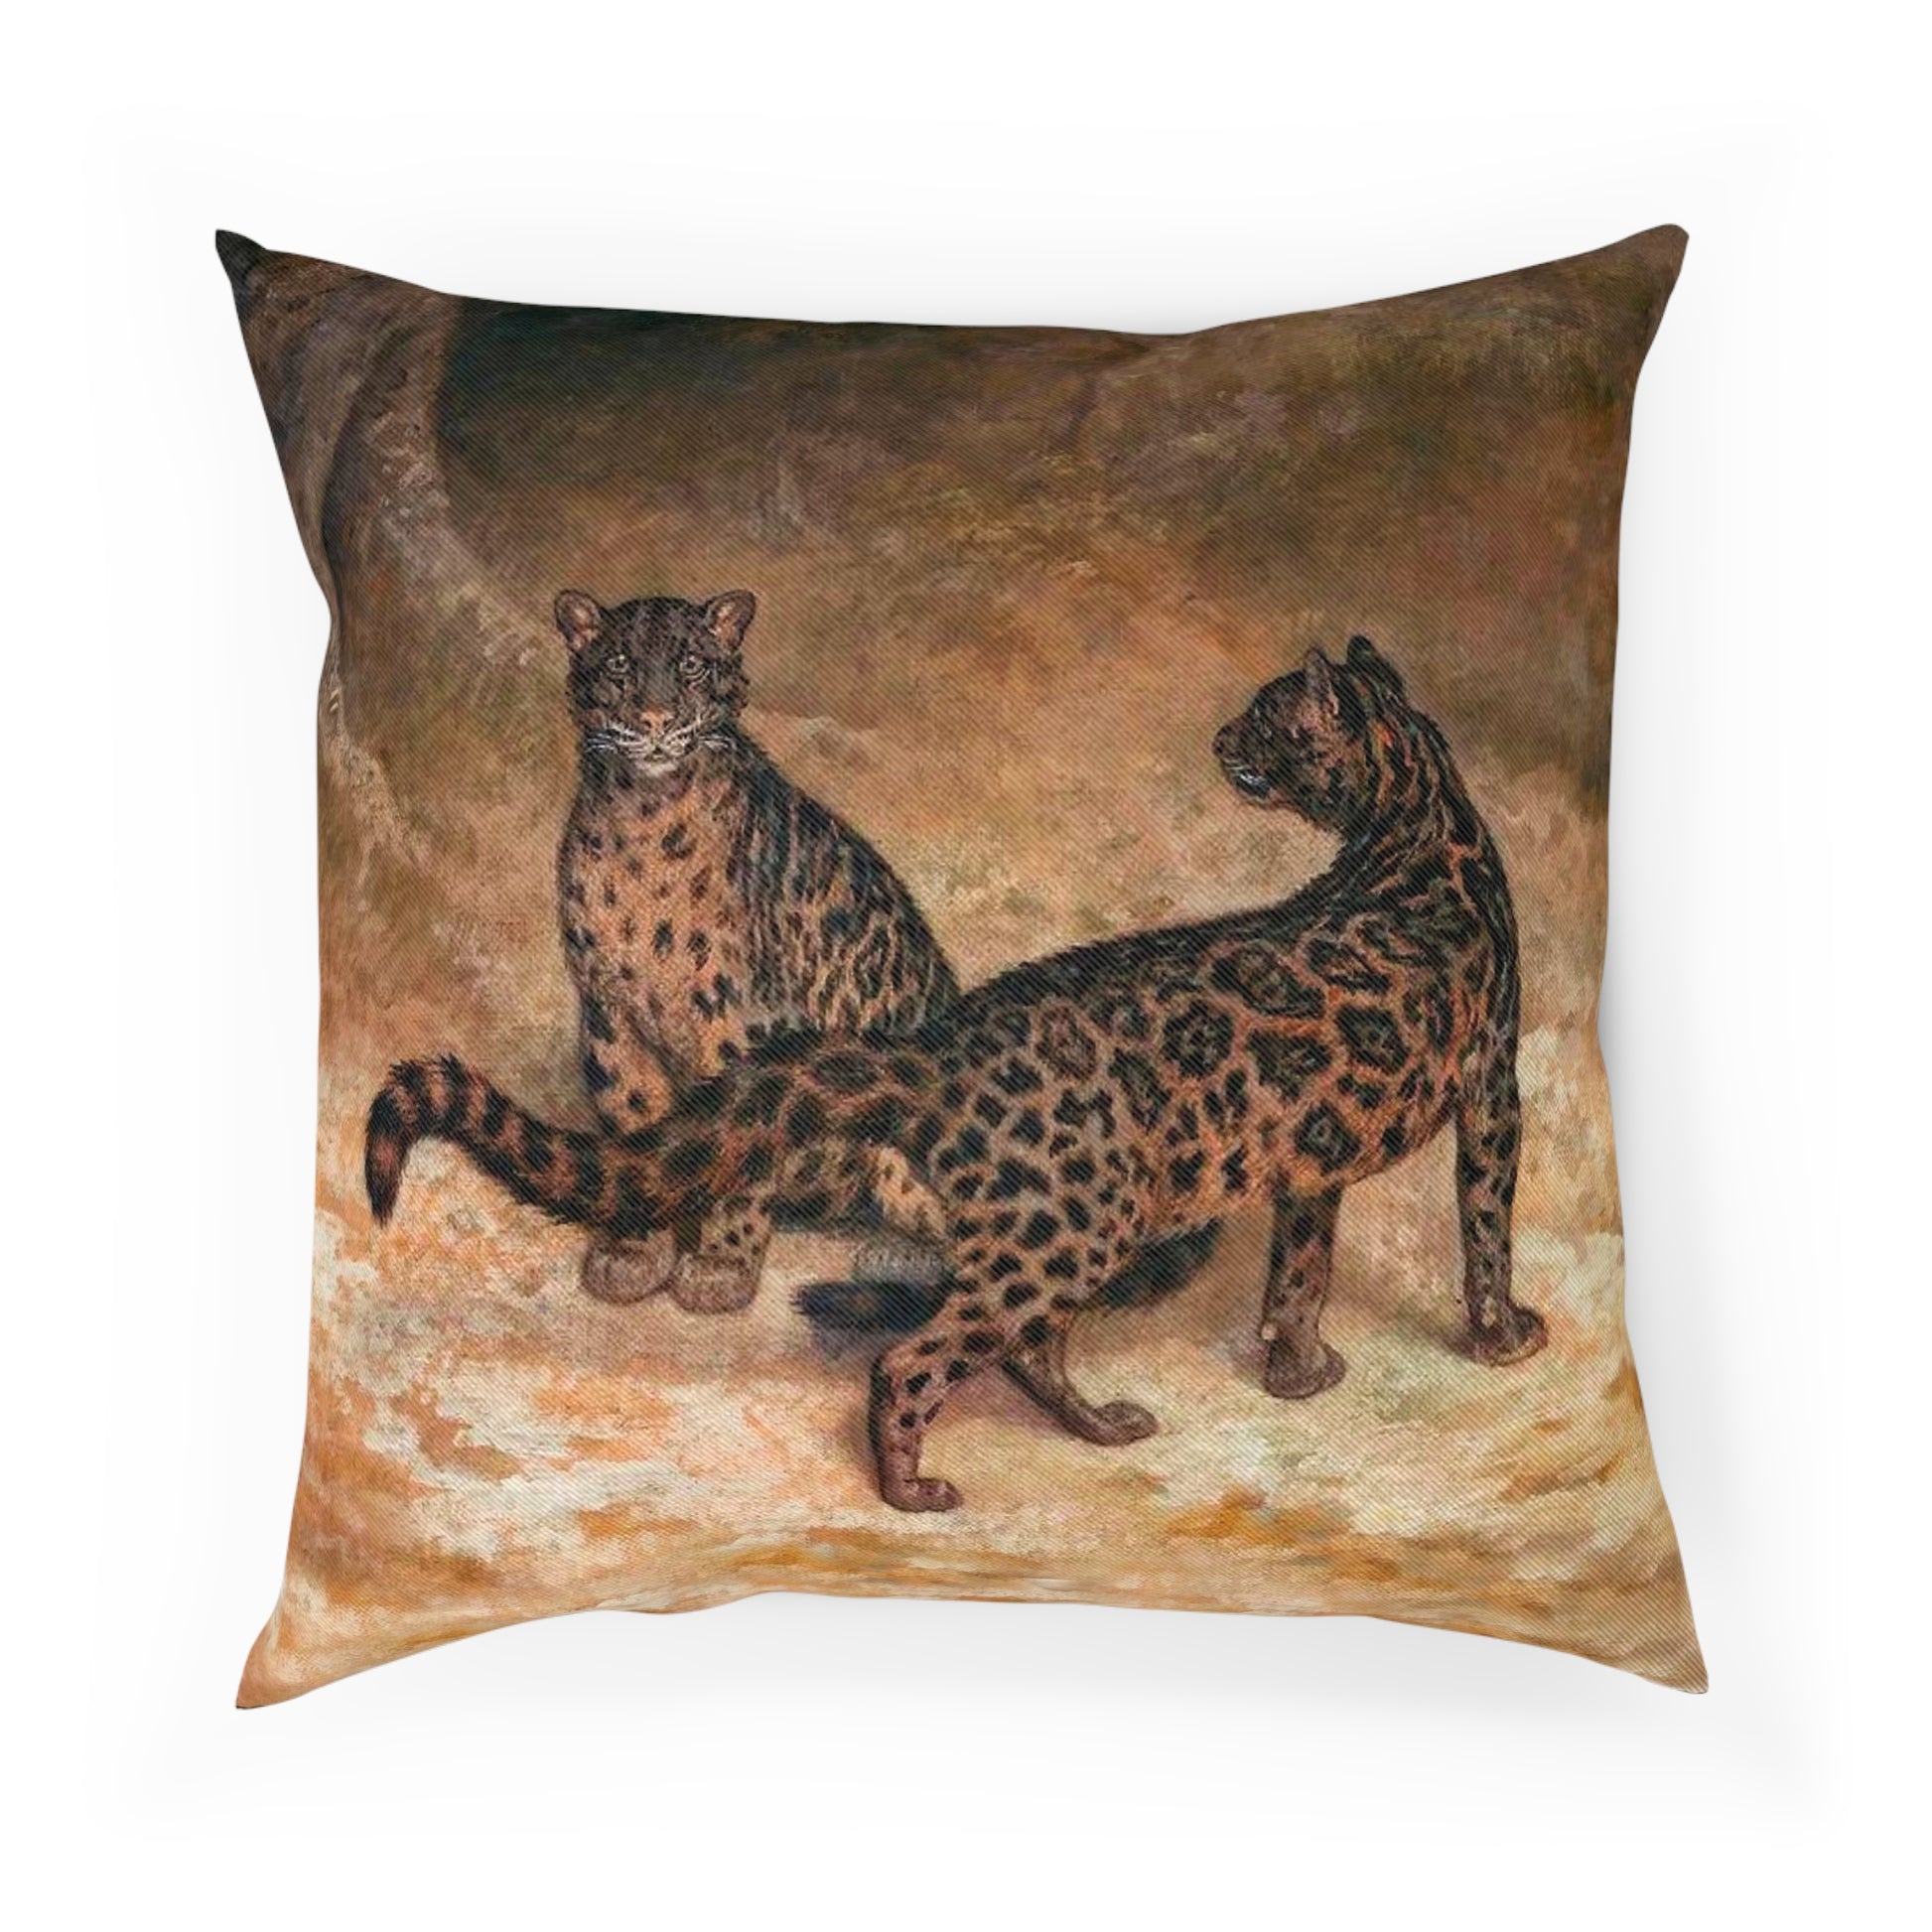 Clouded Leopards Paining Throw Pillow Cushion